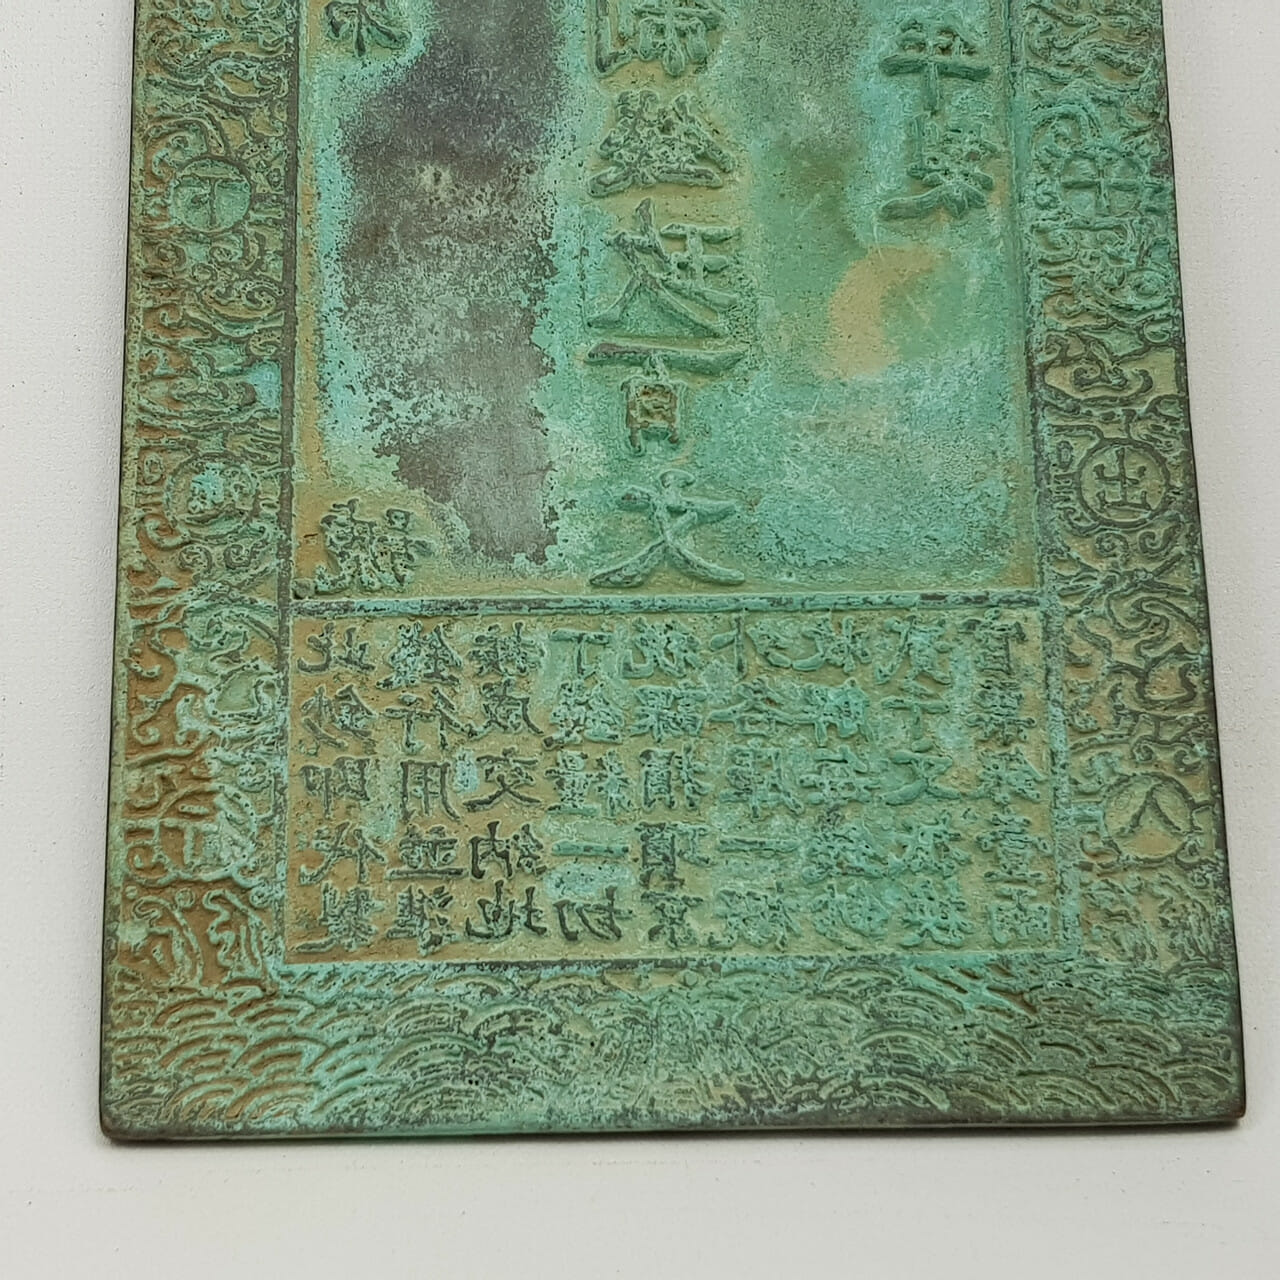 Up for sale we have a CHINESE METAL SEAL / STAMP #51522